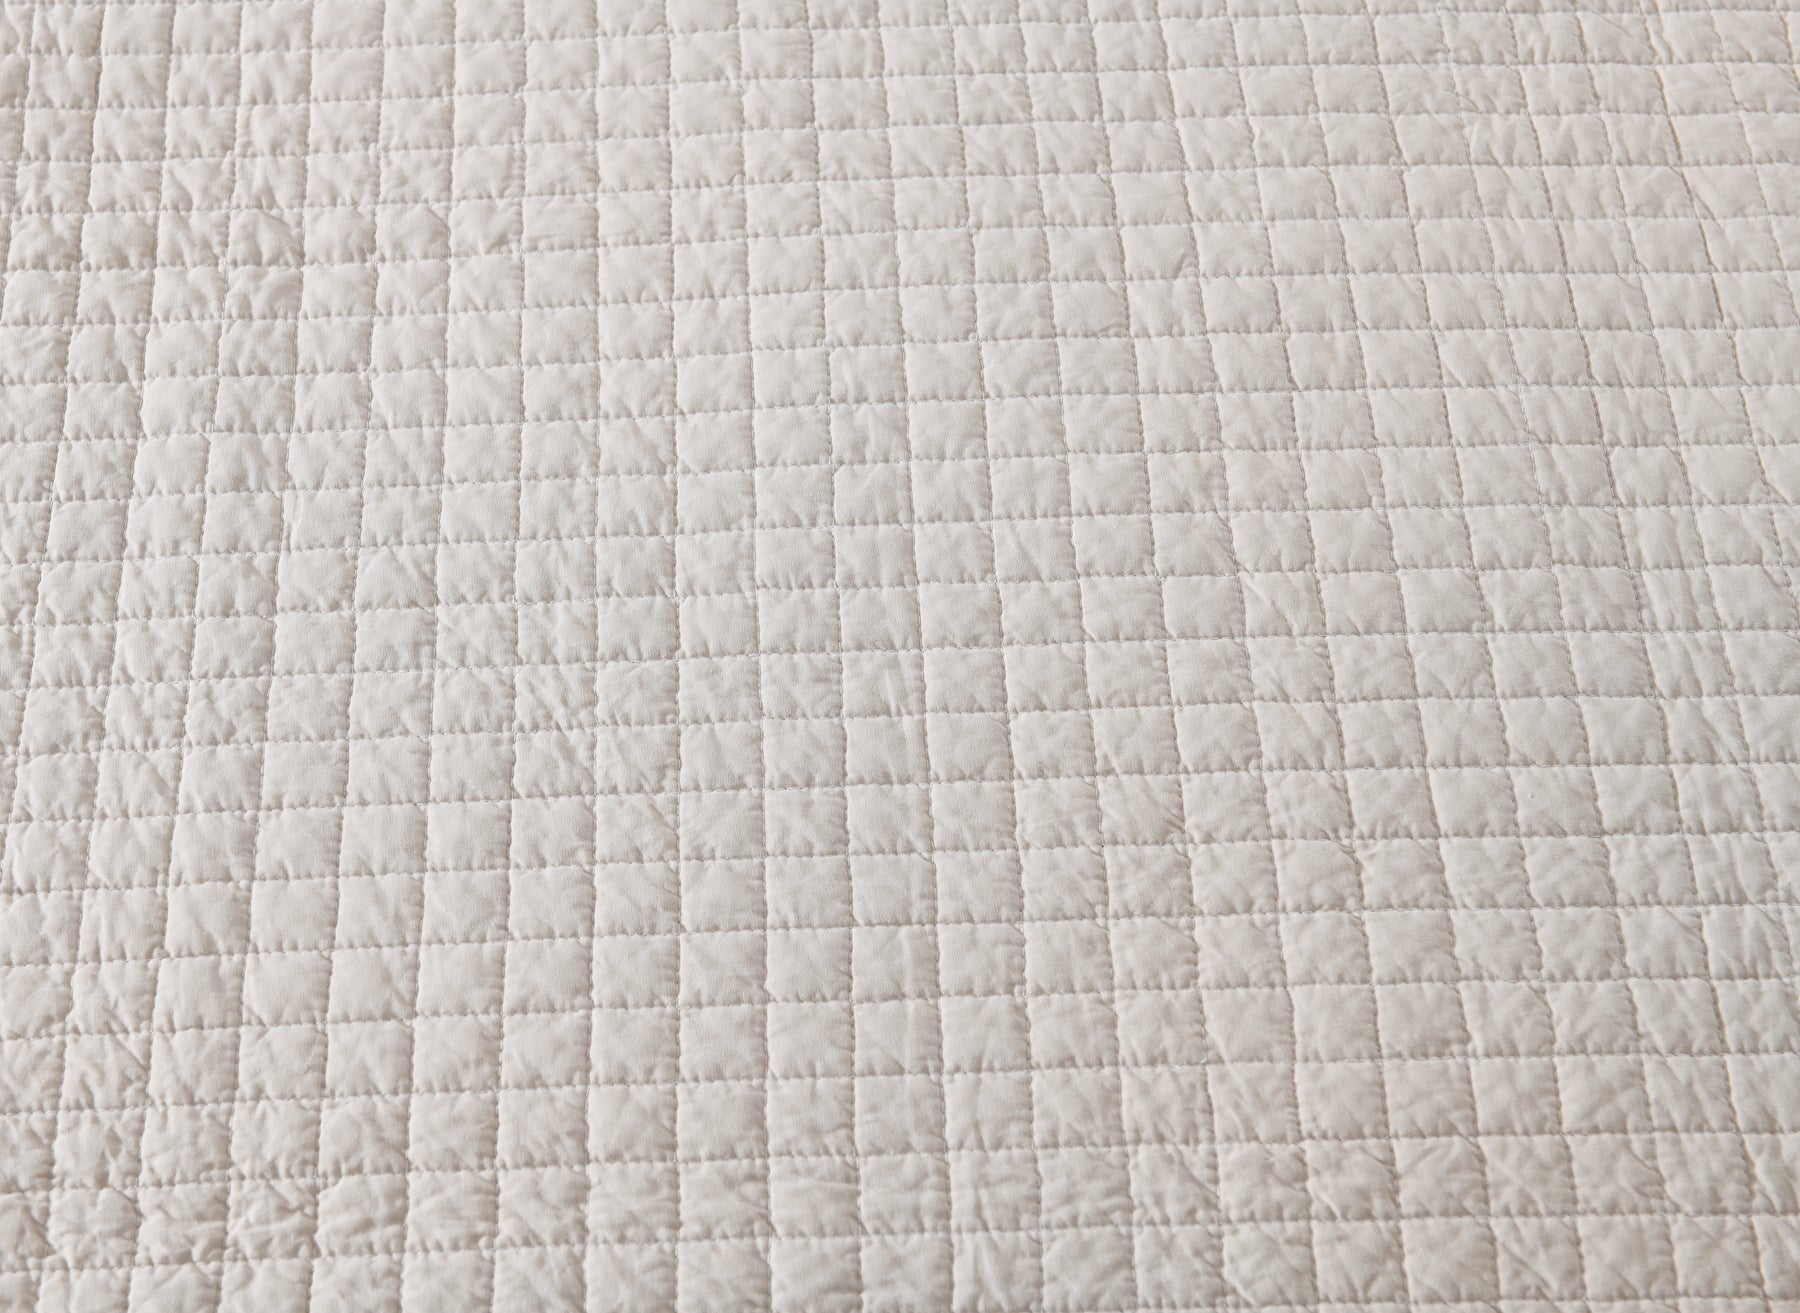 100% Cotton Quilted Throw Decorative Throw Blanket Quilt 50"x60"